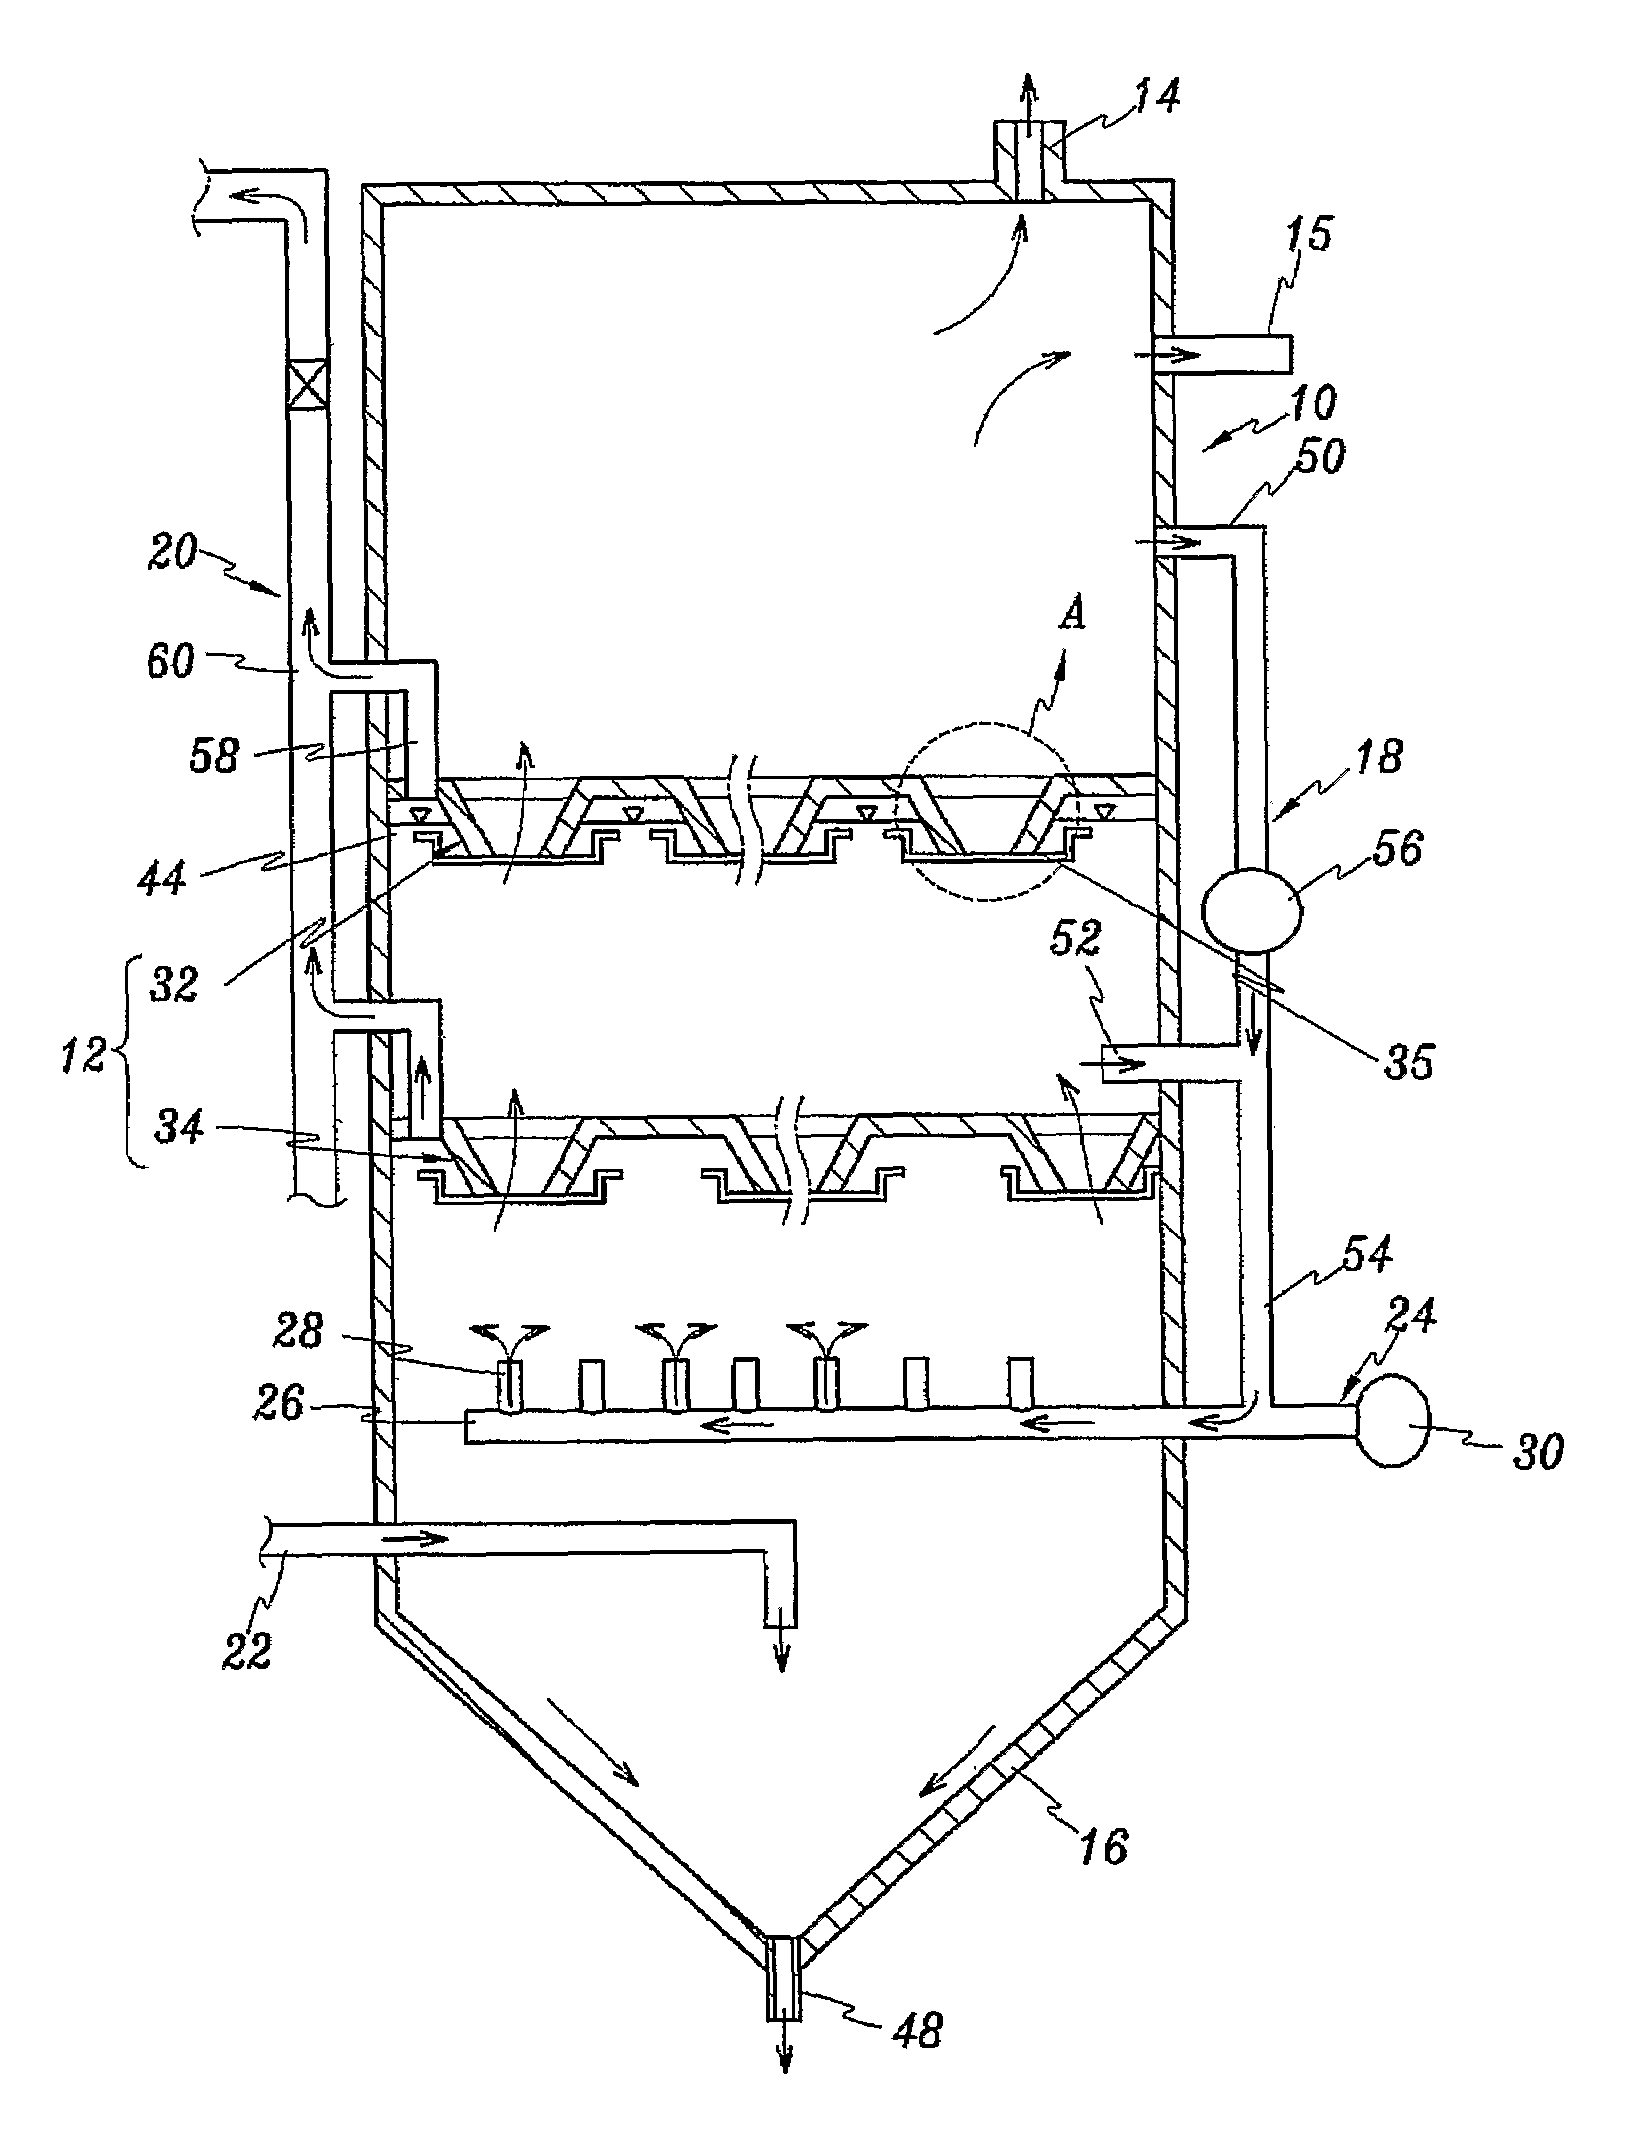 Fluids fluxion method and plant for wastewater treatment